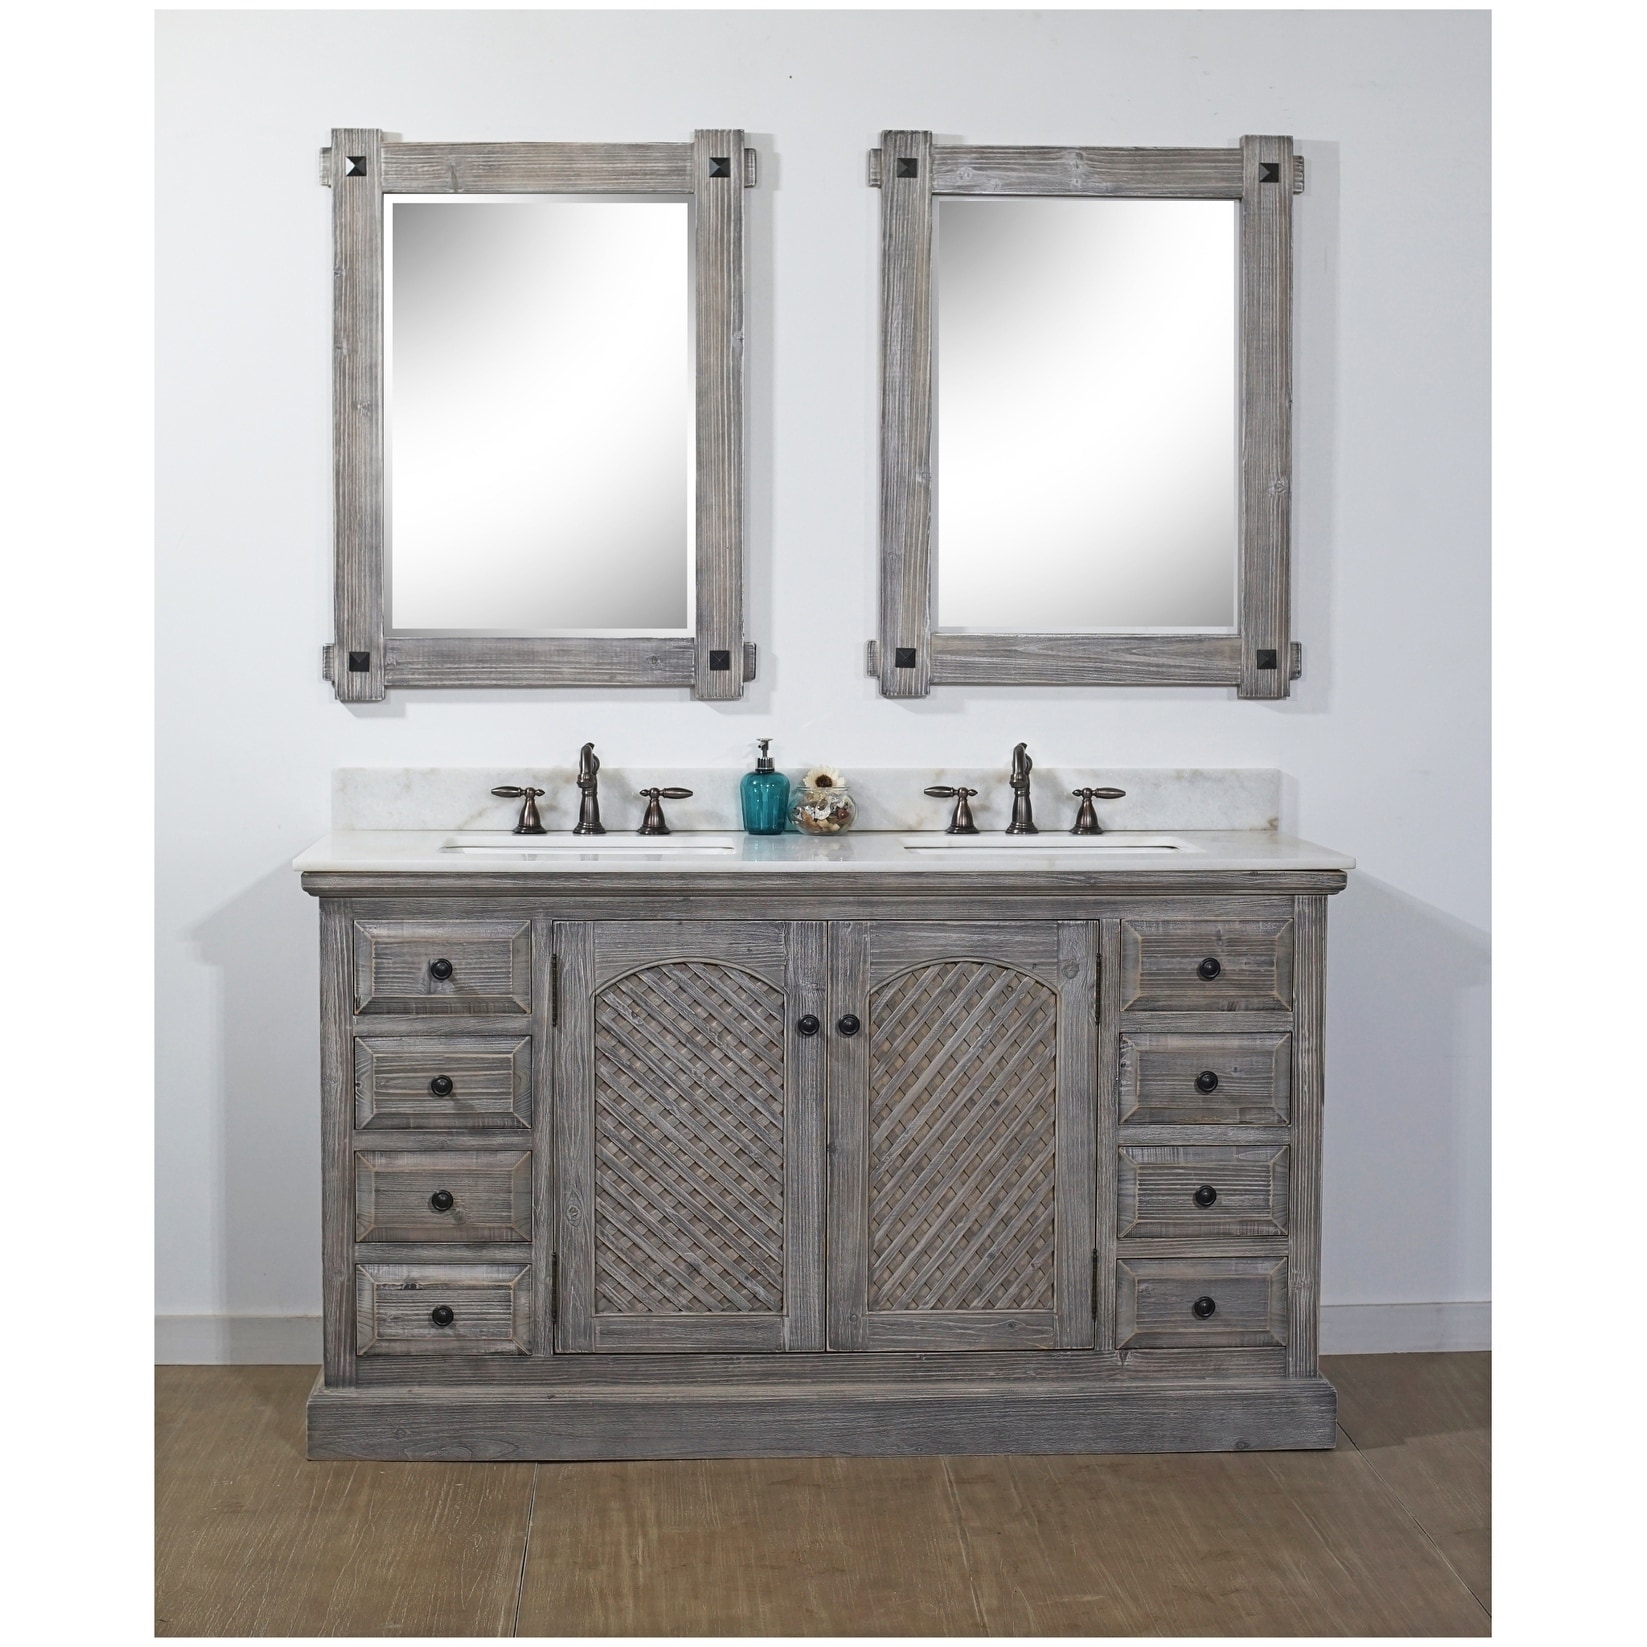 Shop Black Friday Deals On Rustic Style 61 Inch Bathroom Vanity In Grey Driftwood Finish With Arctic Pearl Quartz Top No Faucet Overstock 18505129